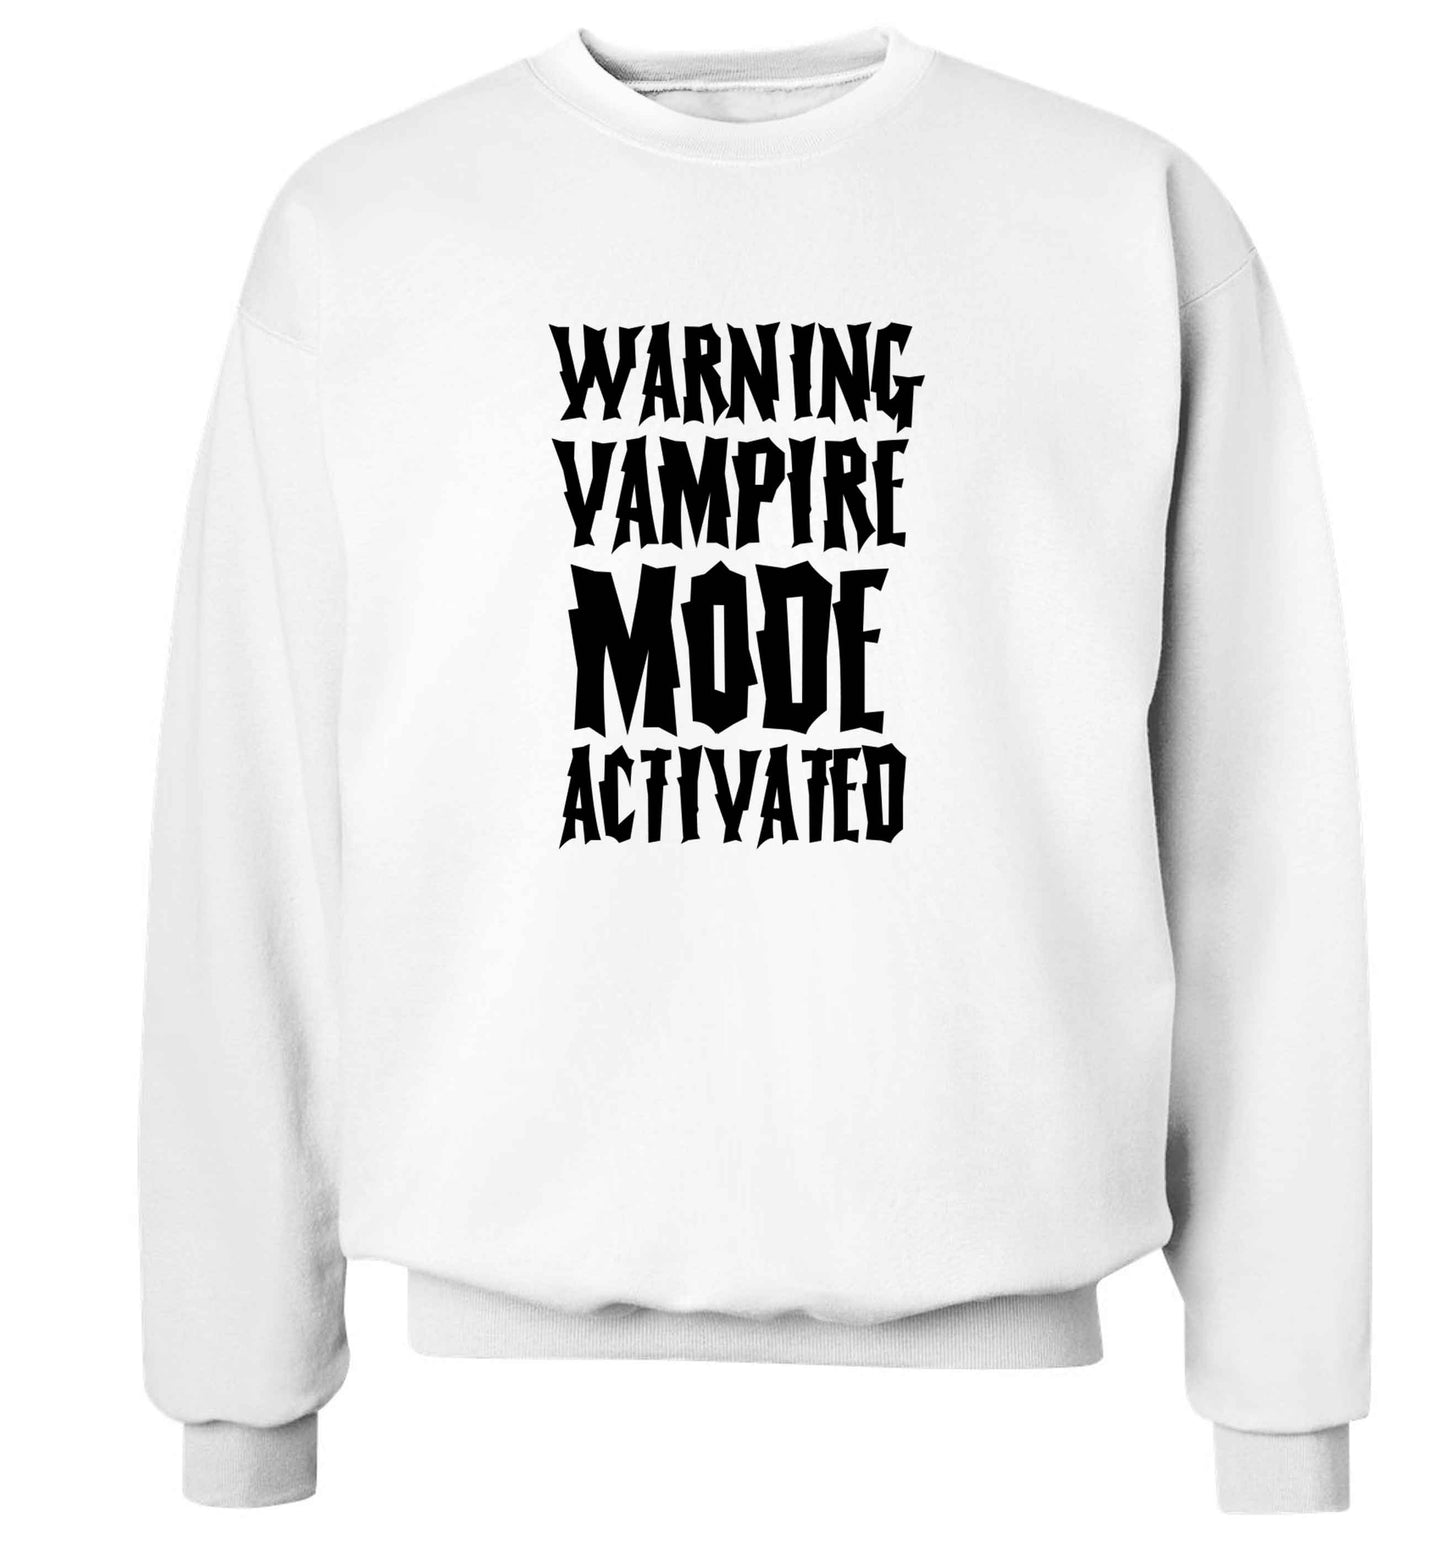 Warning vampire mode activated adult's unisex white sweater 2XL